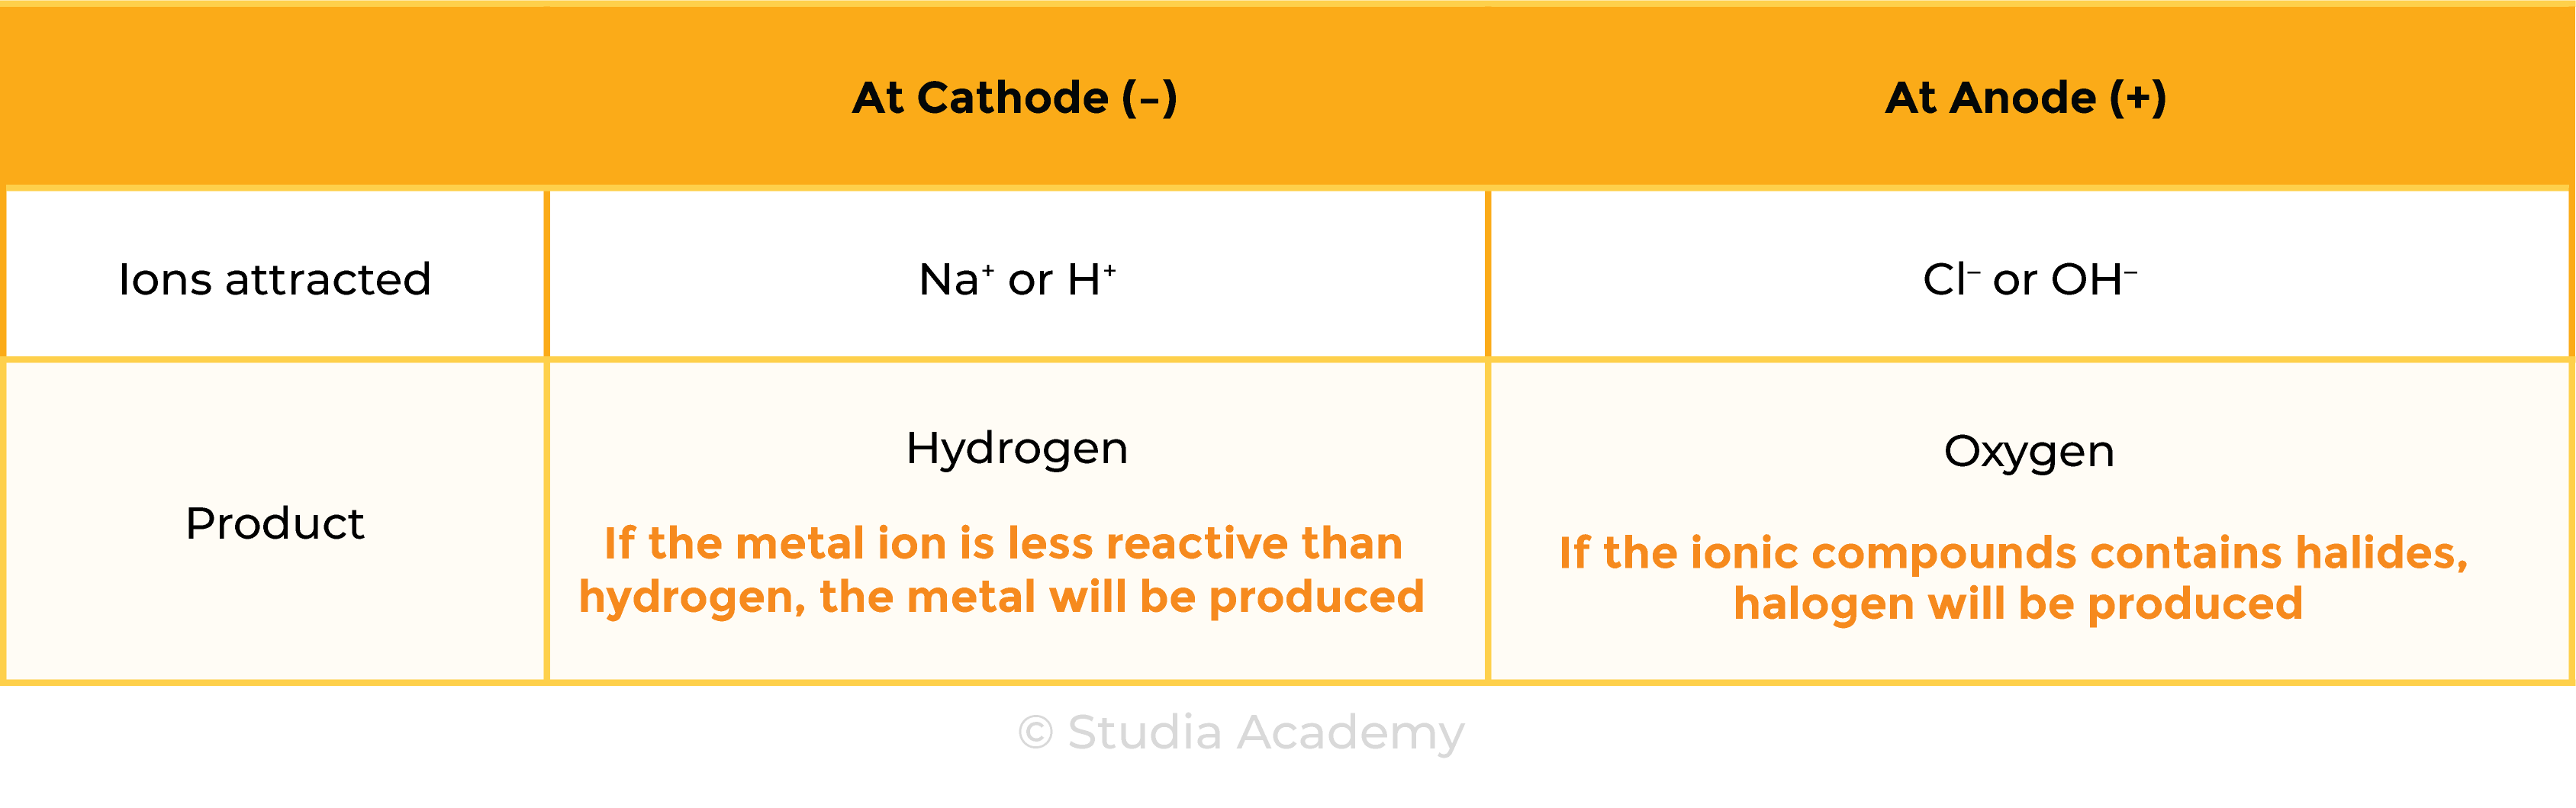 edexcel_igcse_chemistry_topic 09 tables_electrolysis_003_aqueous ionic compound NaCl electrode products